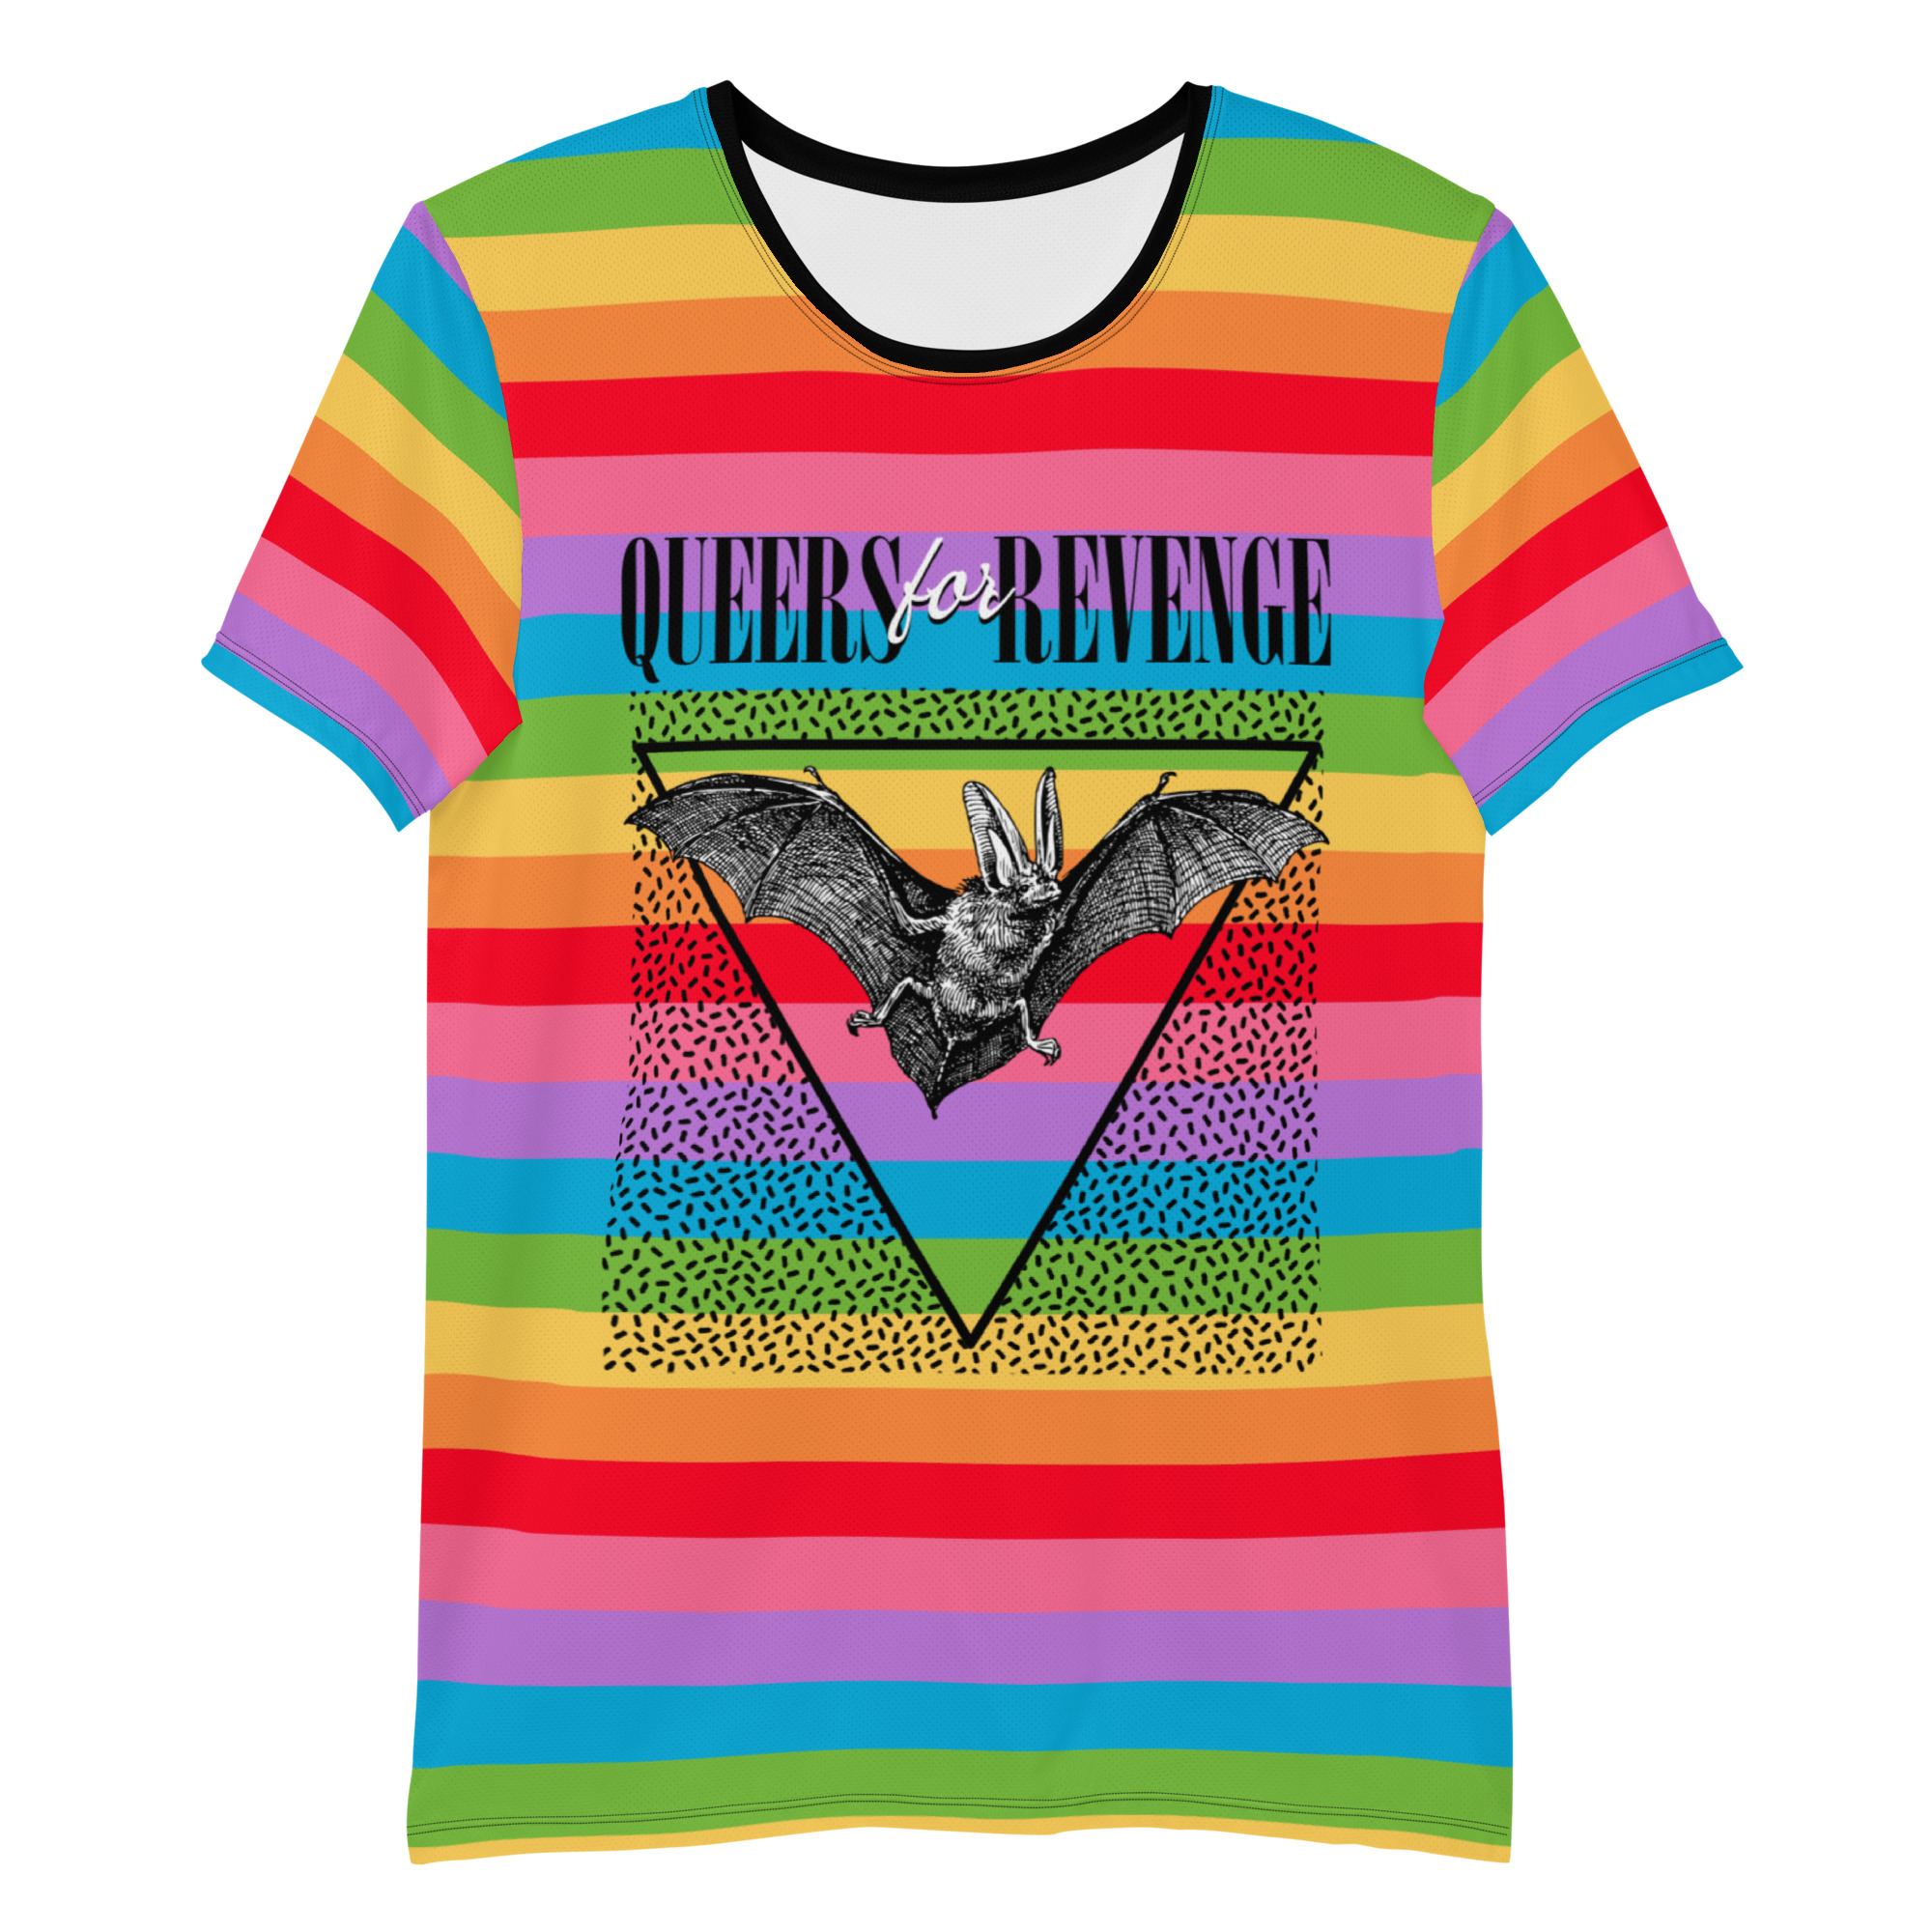 Featured image for “Queers for Revenge Rainbow Pride - All-Over Print Men's Athletic T-shirt”